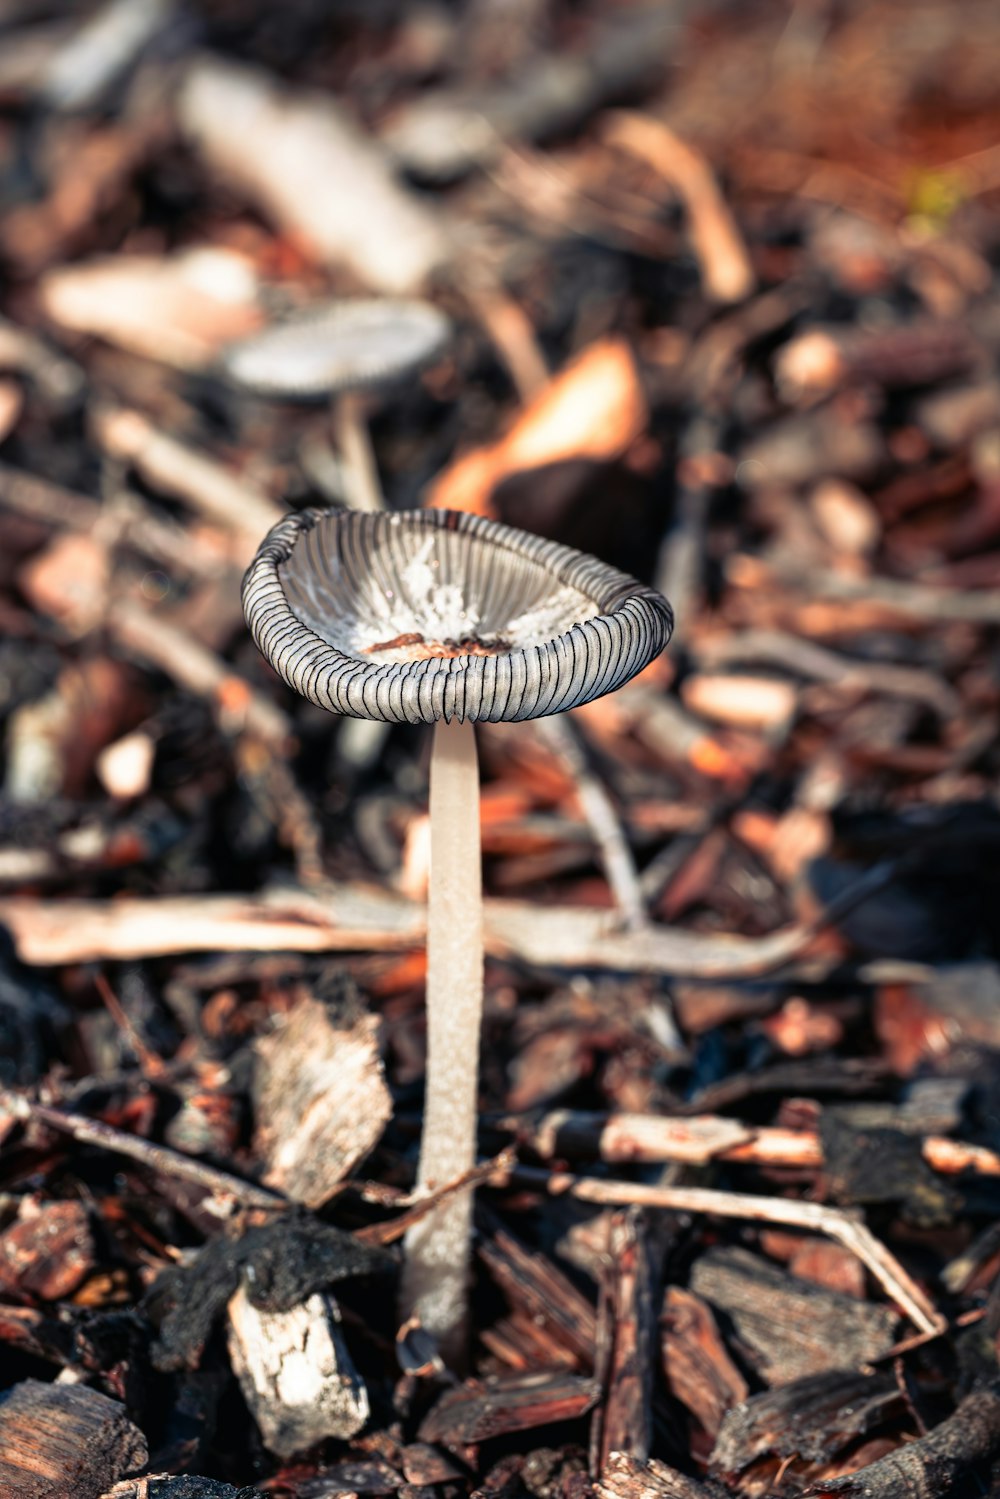 a close up of a small mushroom on the ground